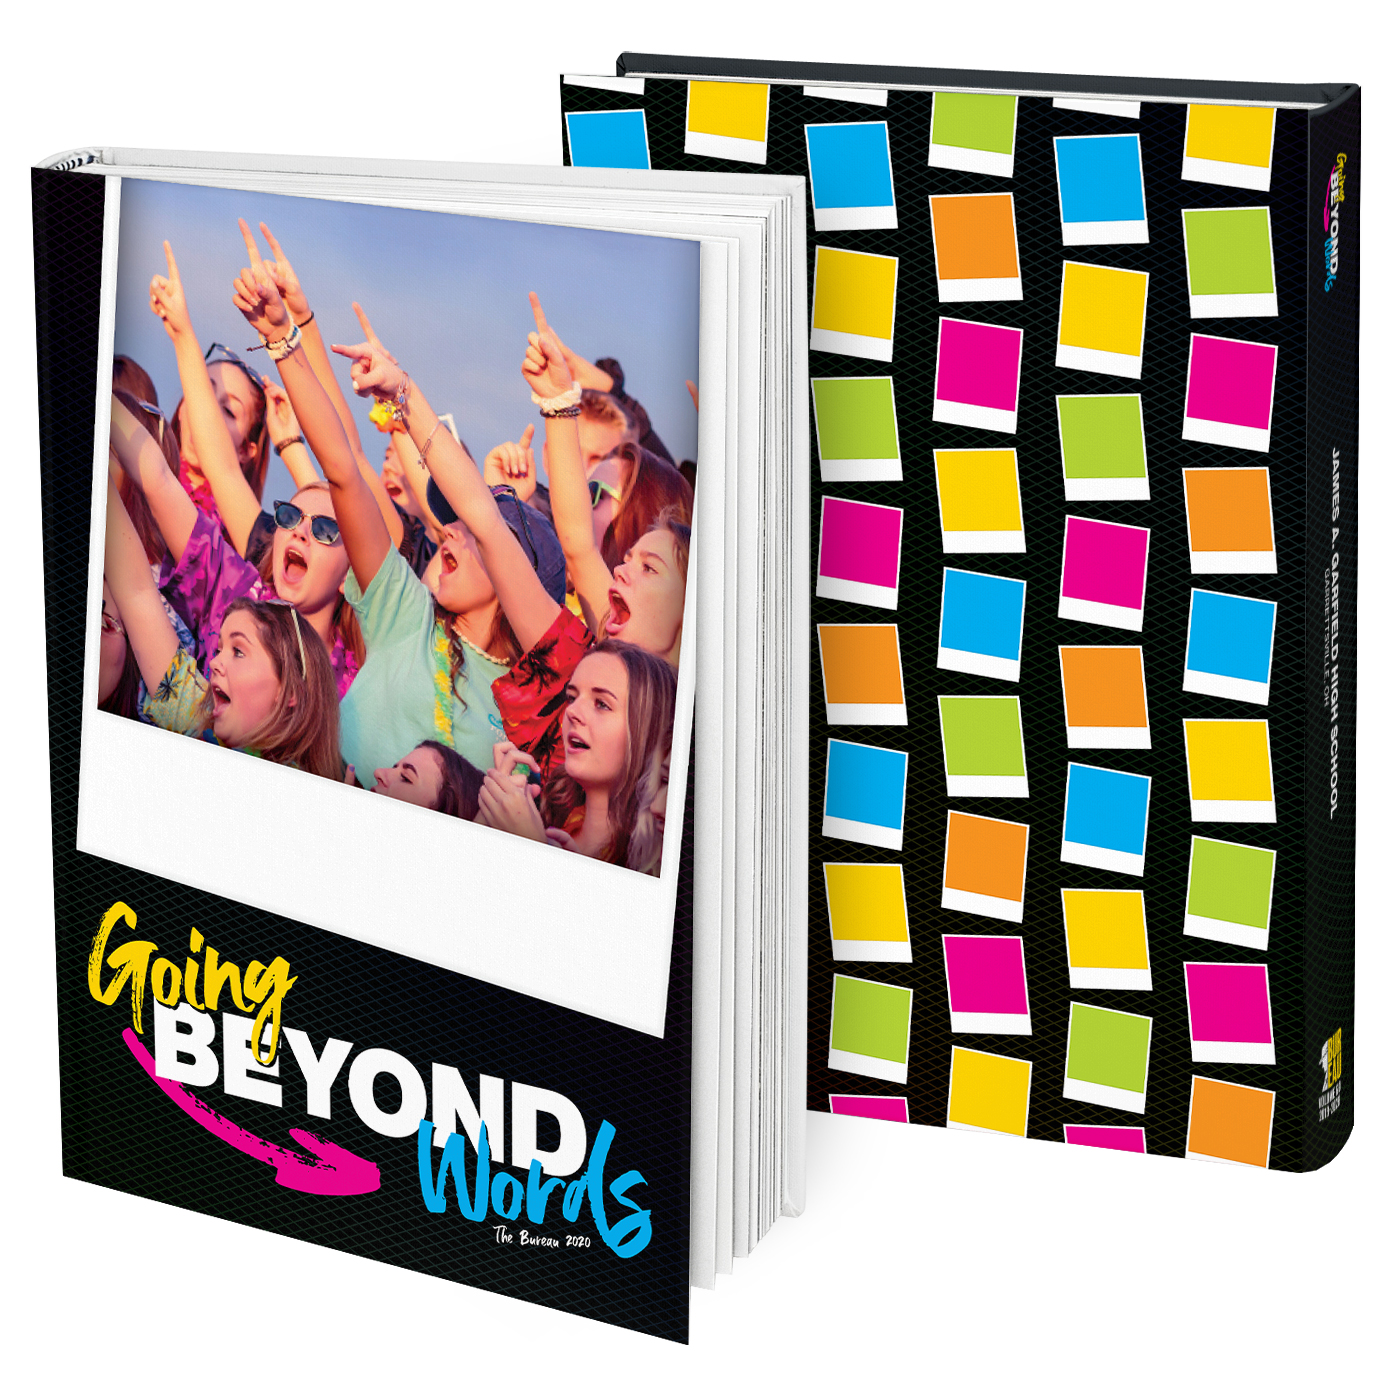 Going Beyond Words - 2019/2020 Yearbook